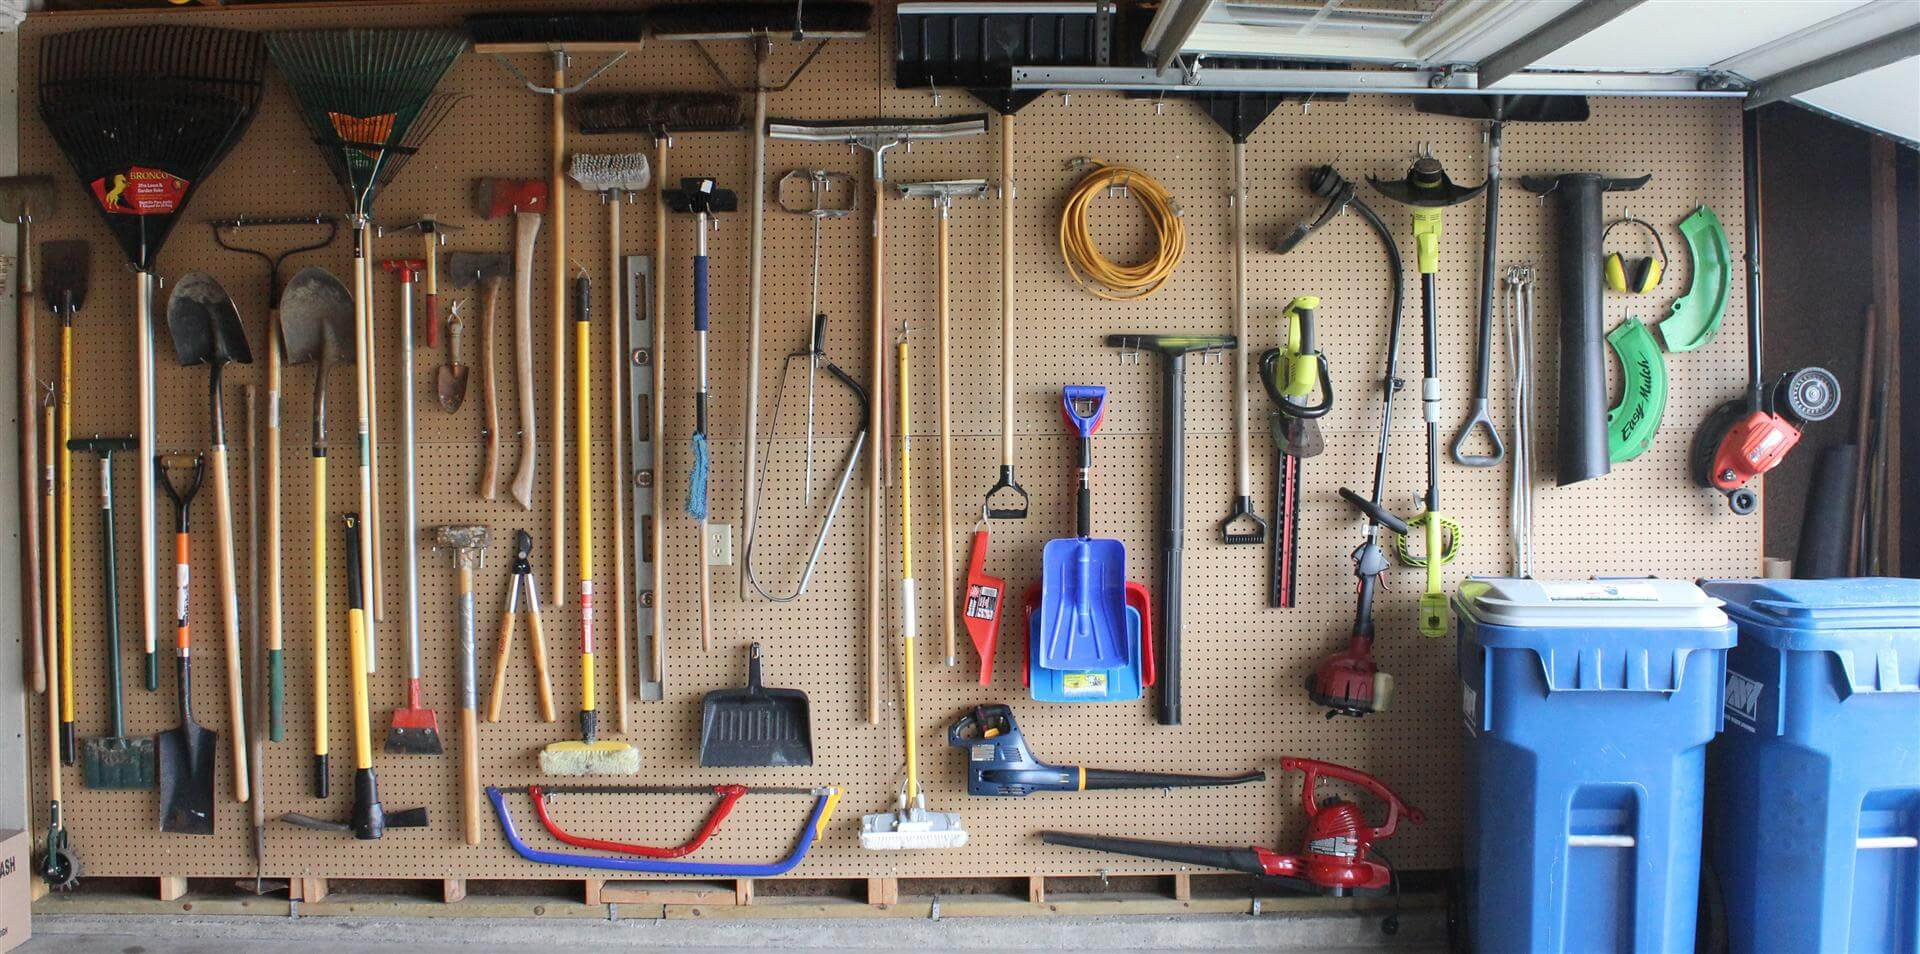 Organize Tools In Garage
 Organize your garage with pegboard